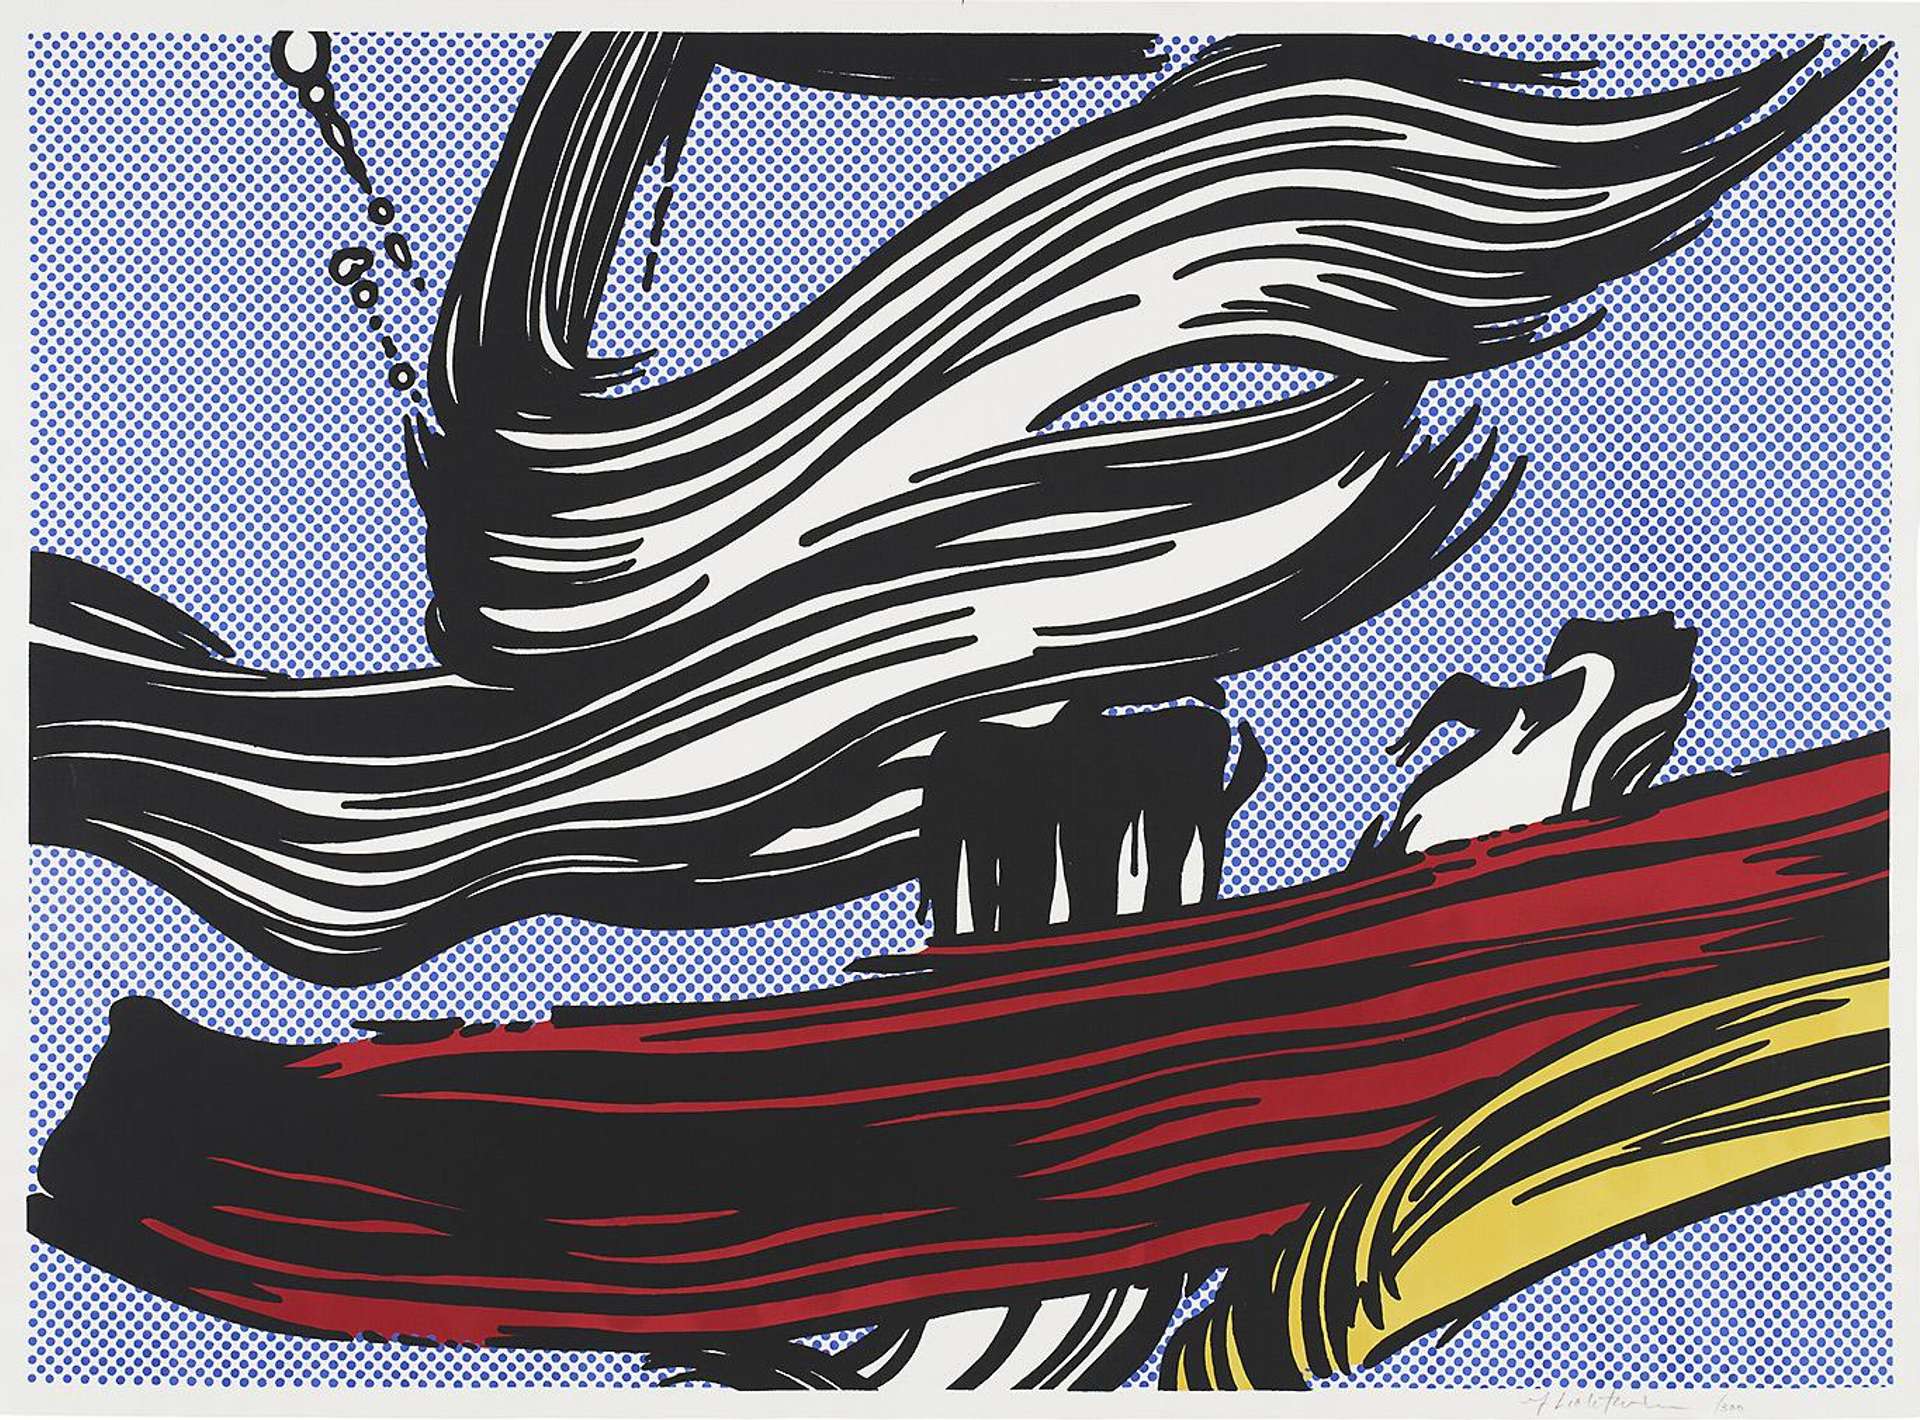 An image of the print Brushstrokes by Roy Lichtenstein. It shows a comic book-like depiction of a colourful brushstroke against a monochrome background defined by Ben-Day dots.